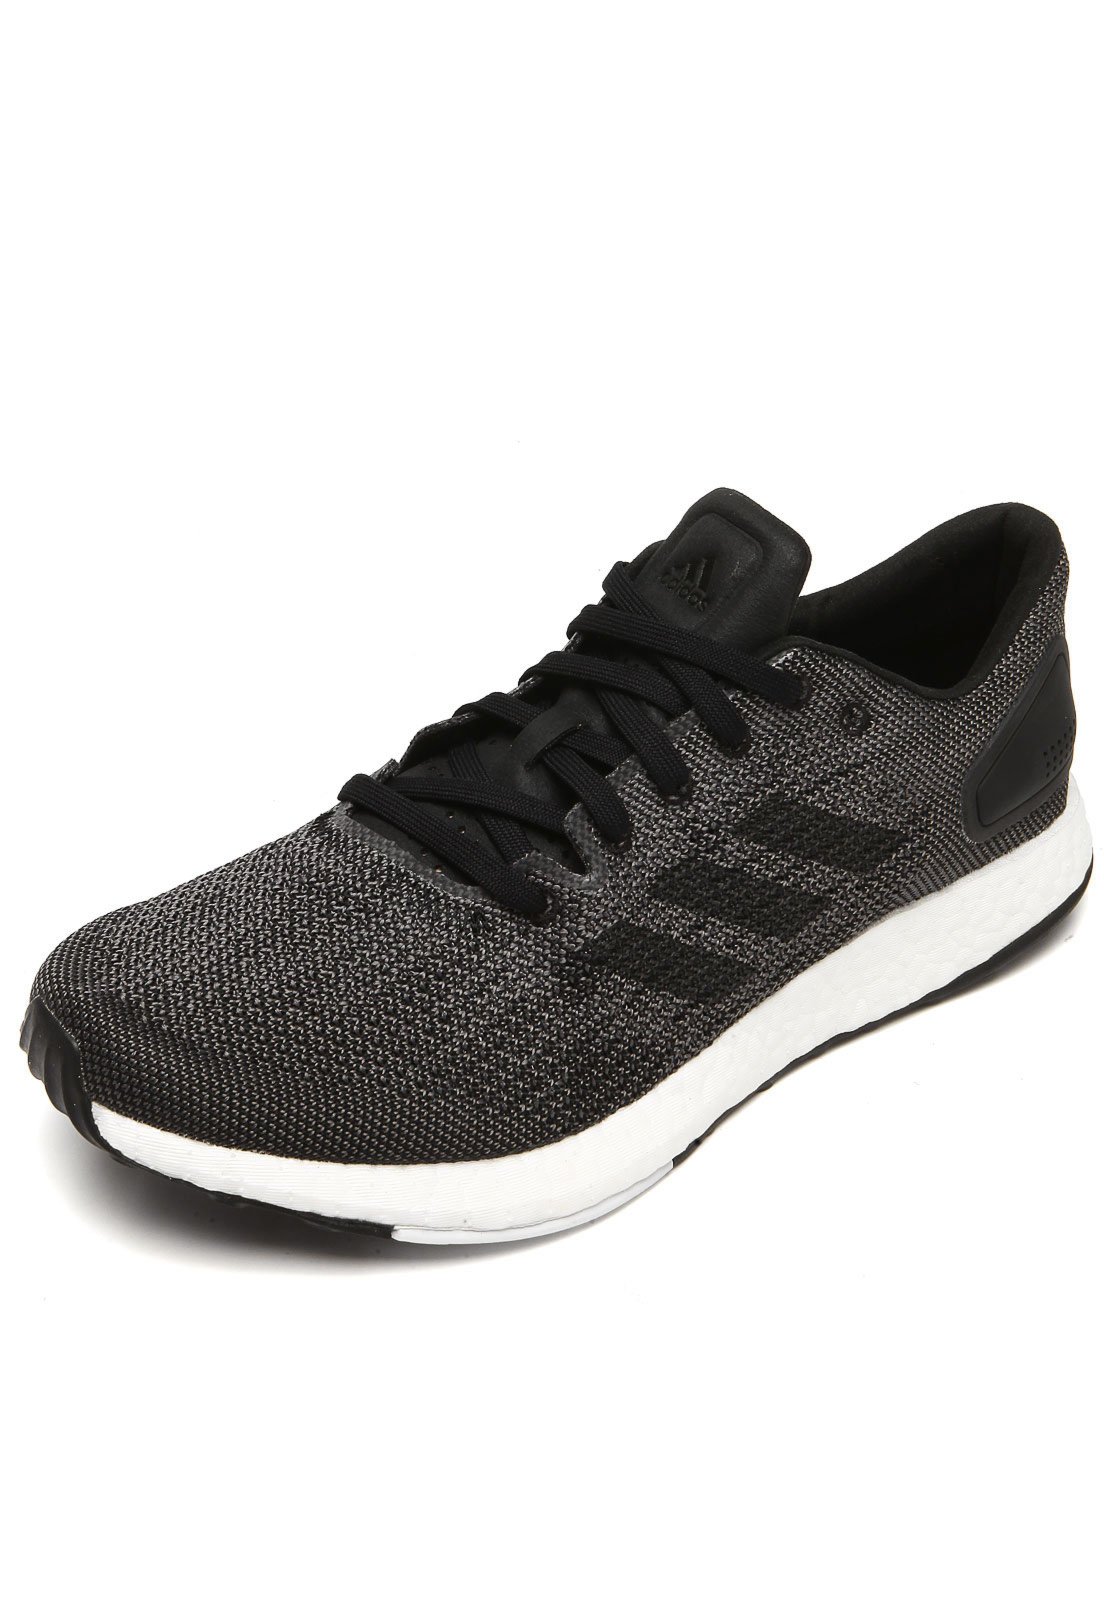 adidas pure boost dpr netshoes